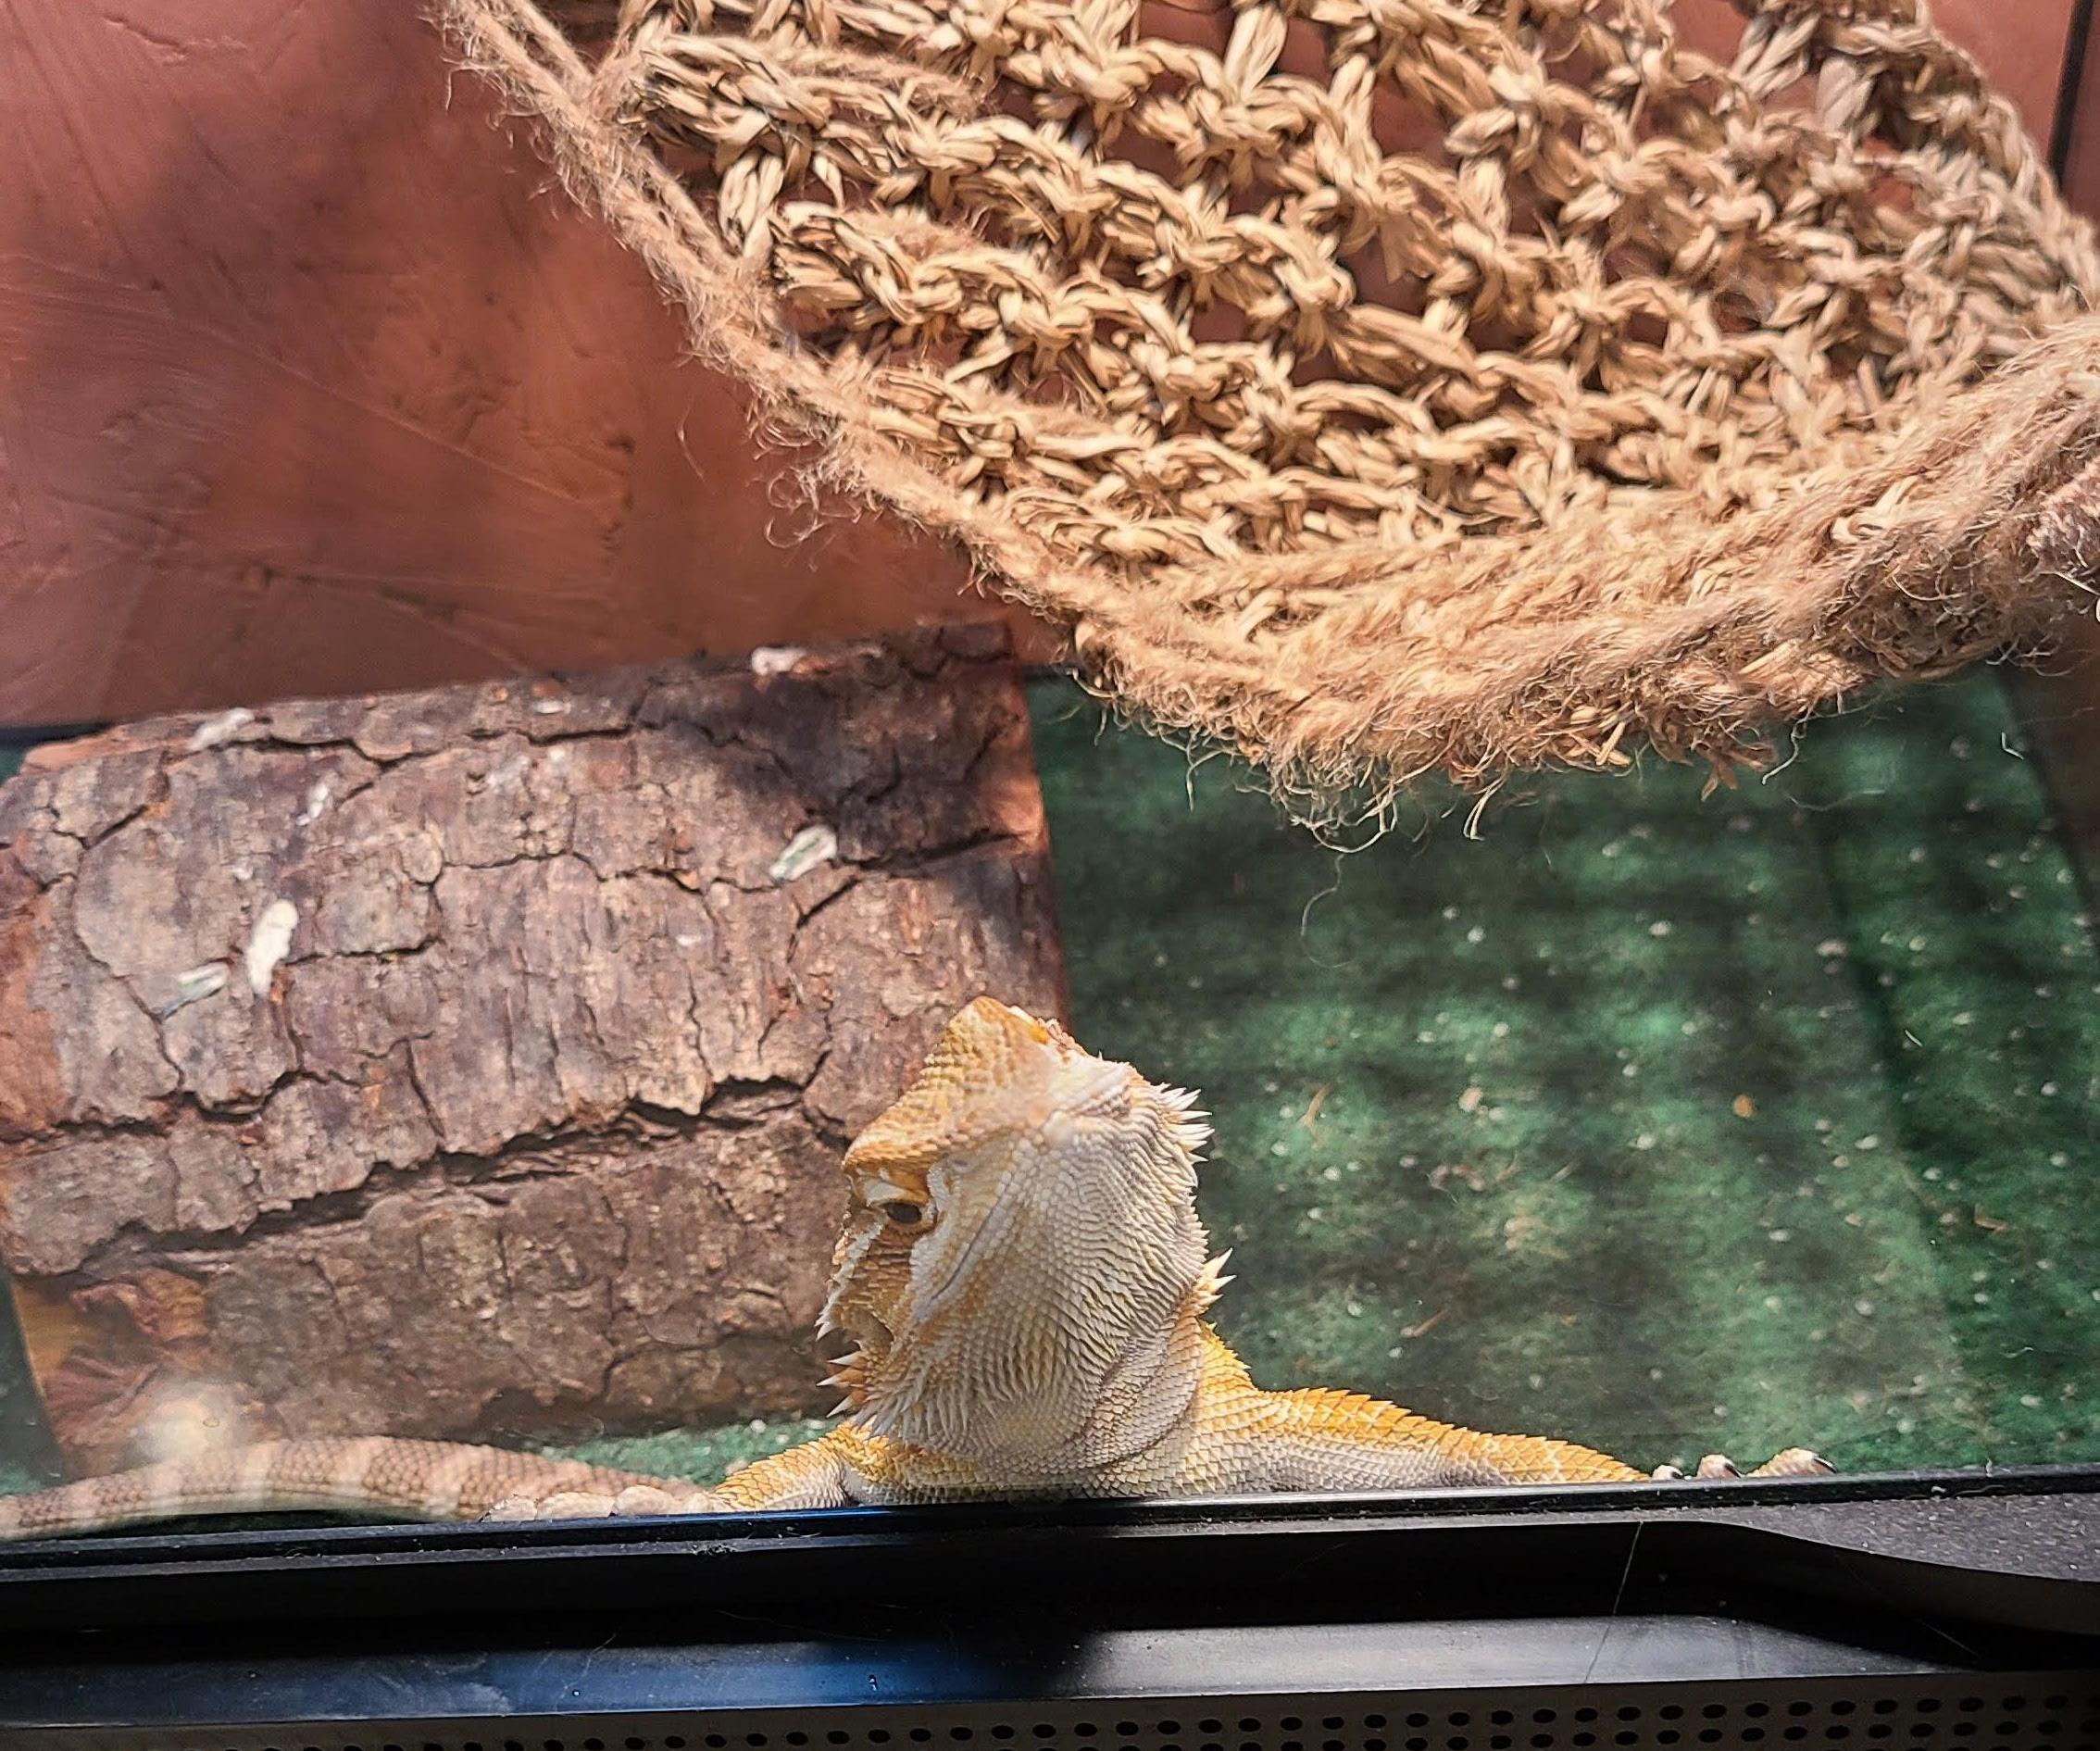 How to Set Up a Bearded Dragon's Enclosure